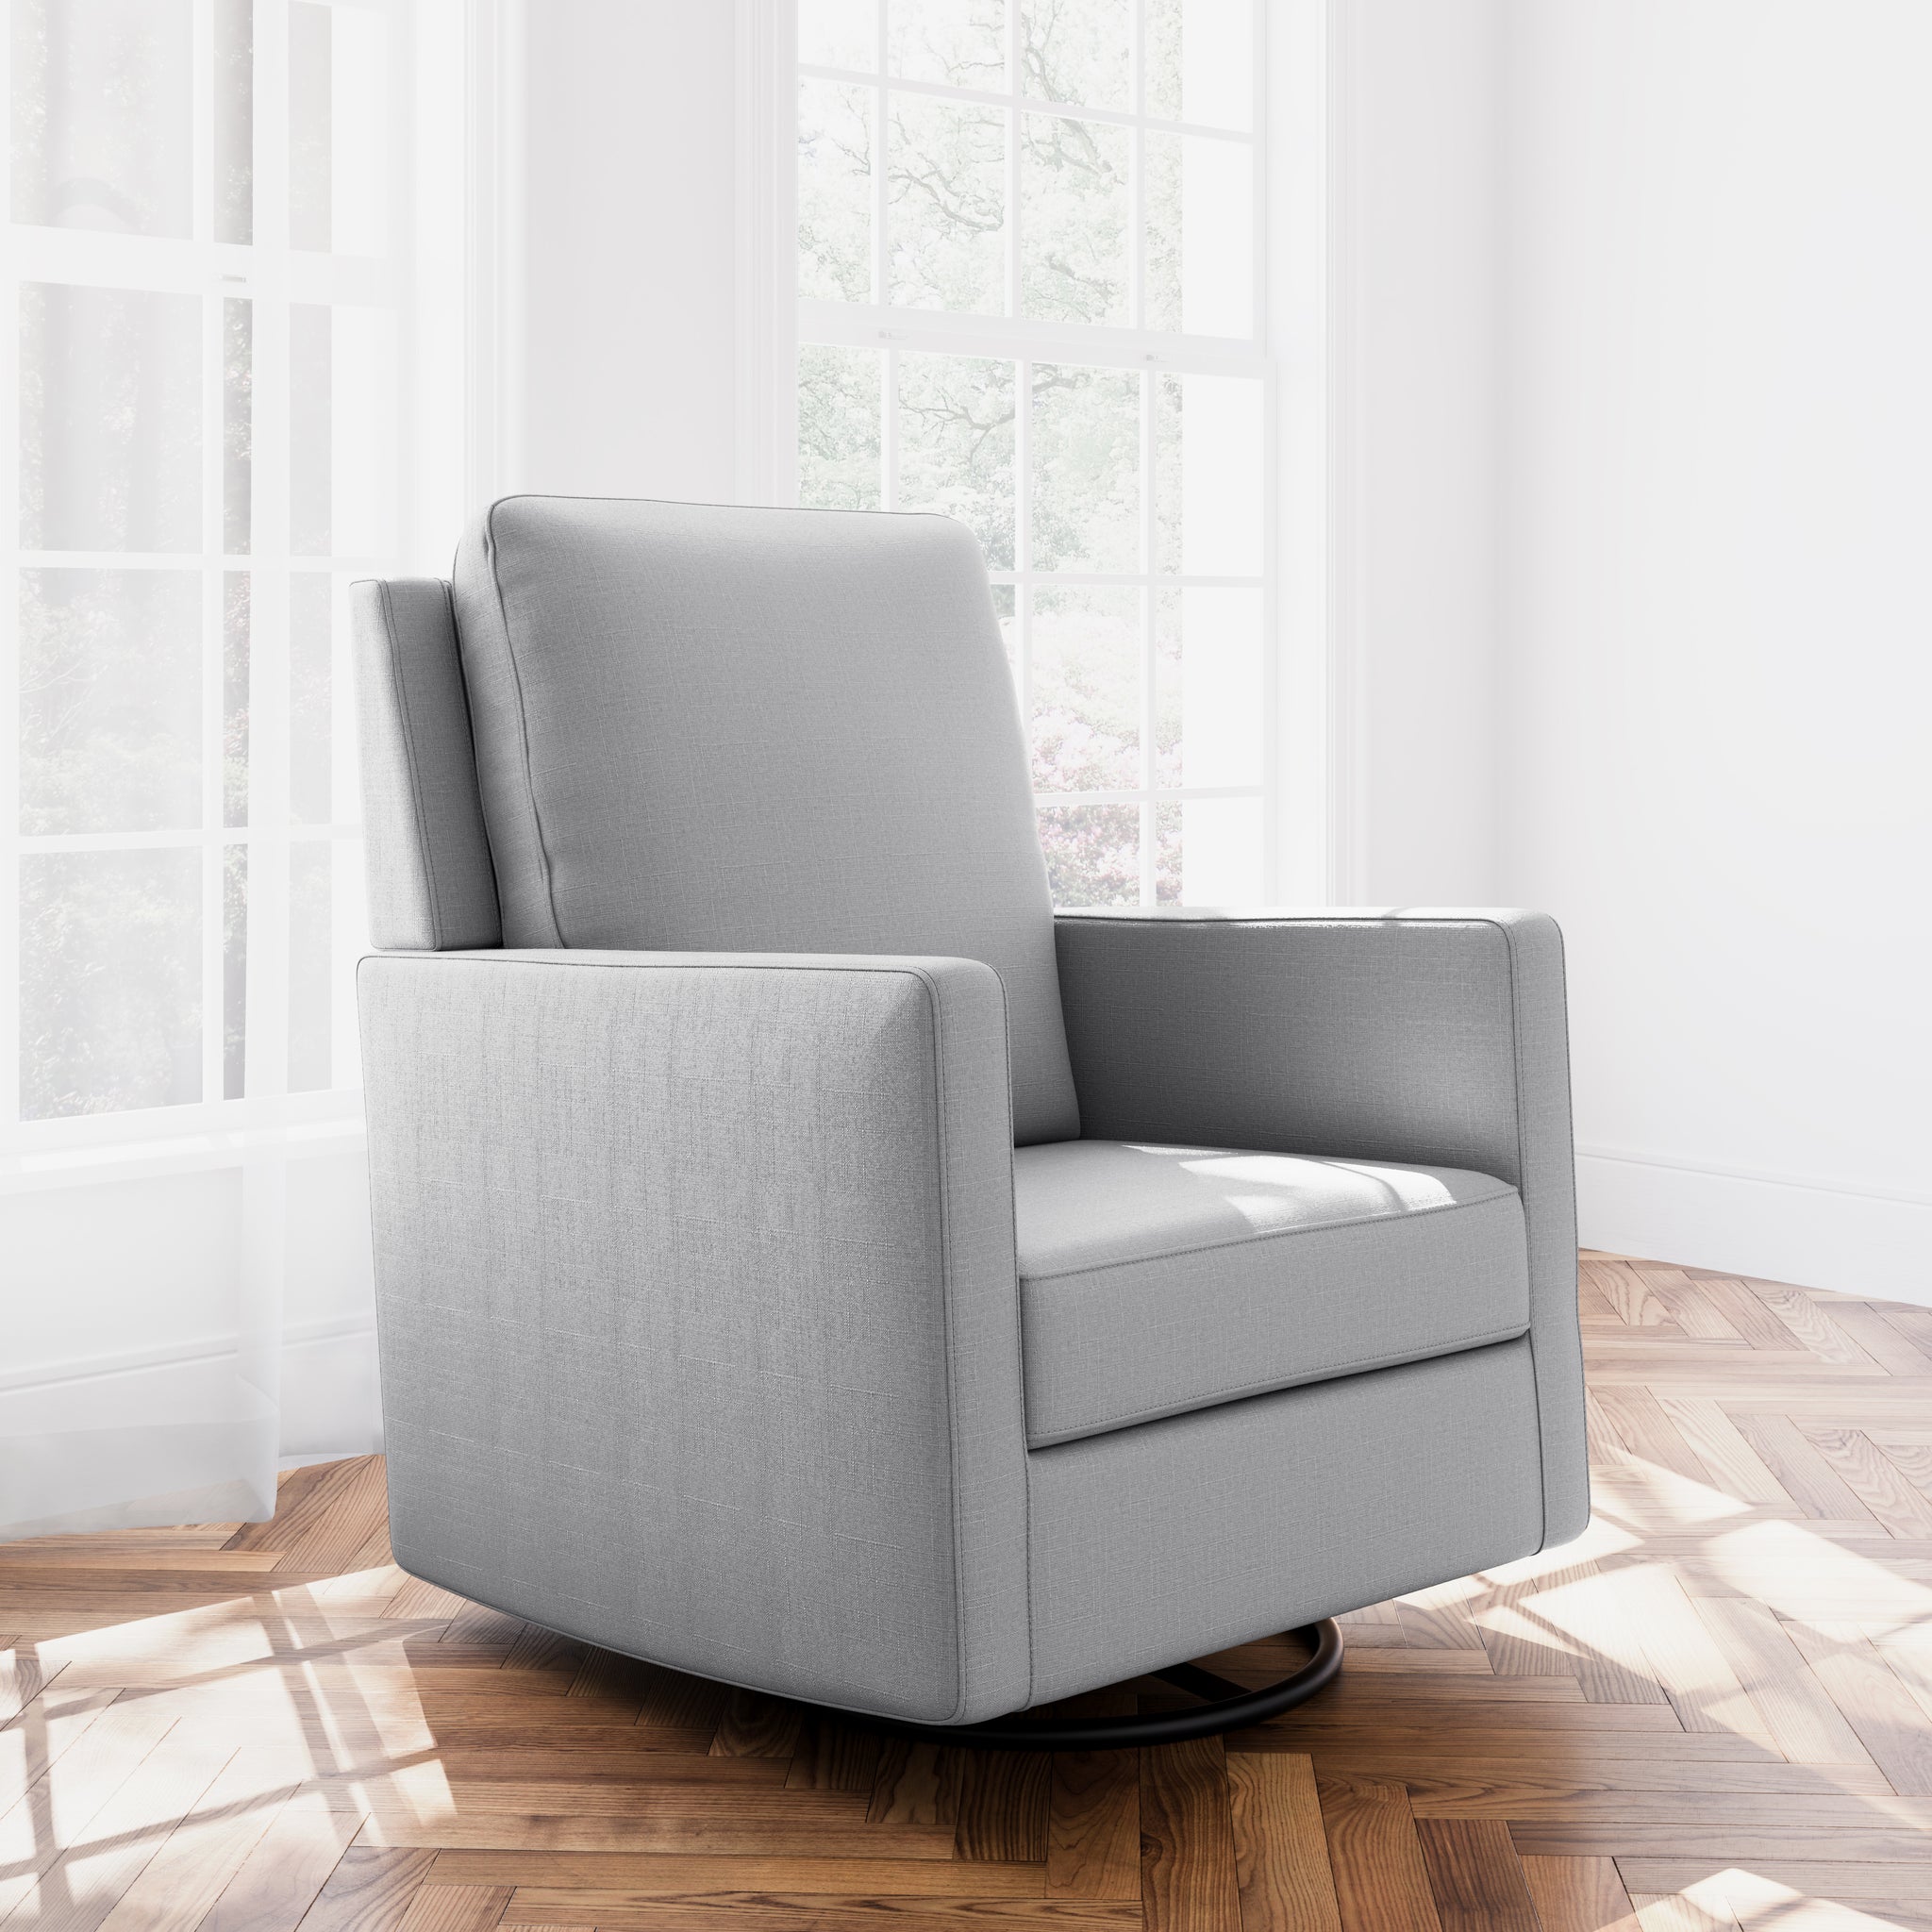 Swivel glider with fog fabric in a room